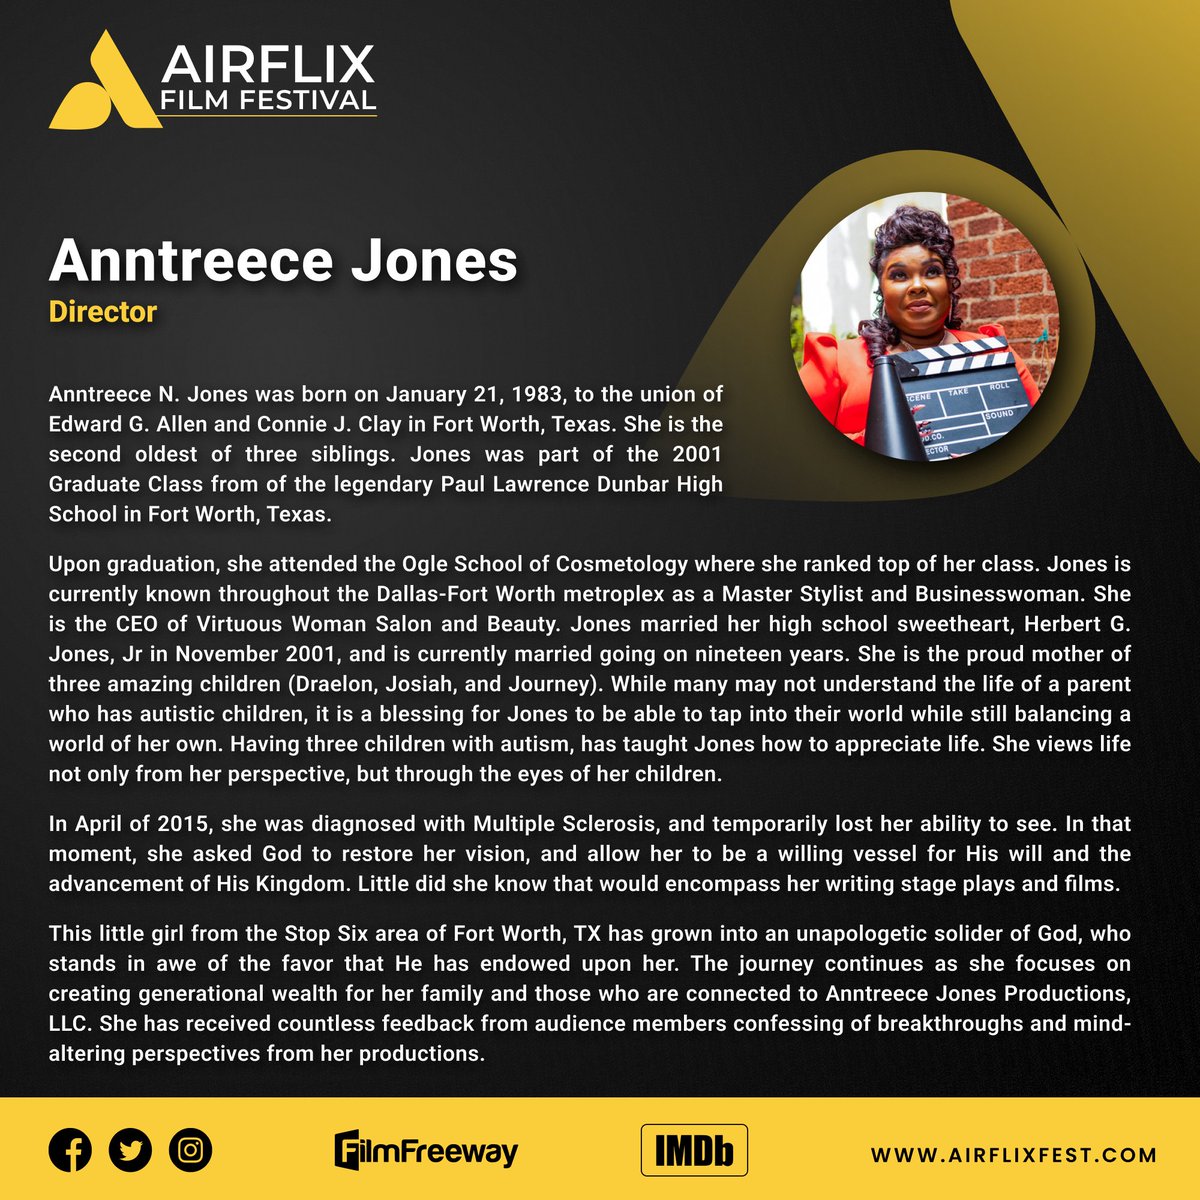 Have some time to know more about Anntreece Jones (Director)
filmfreeway.com/AirflixFilmFes…. Use discount code AIRFLIX
#supportindiefilm #indiefilm #airflixiff